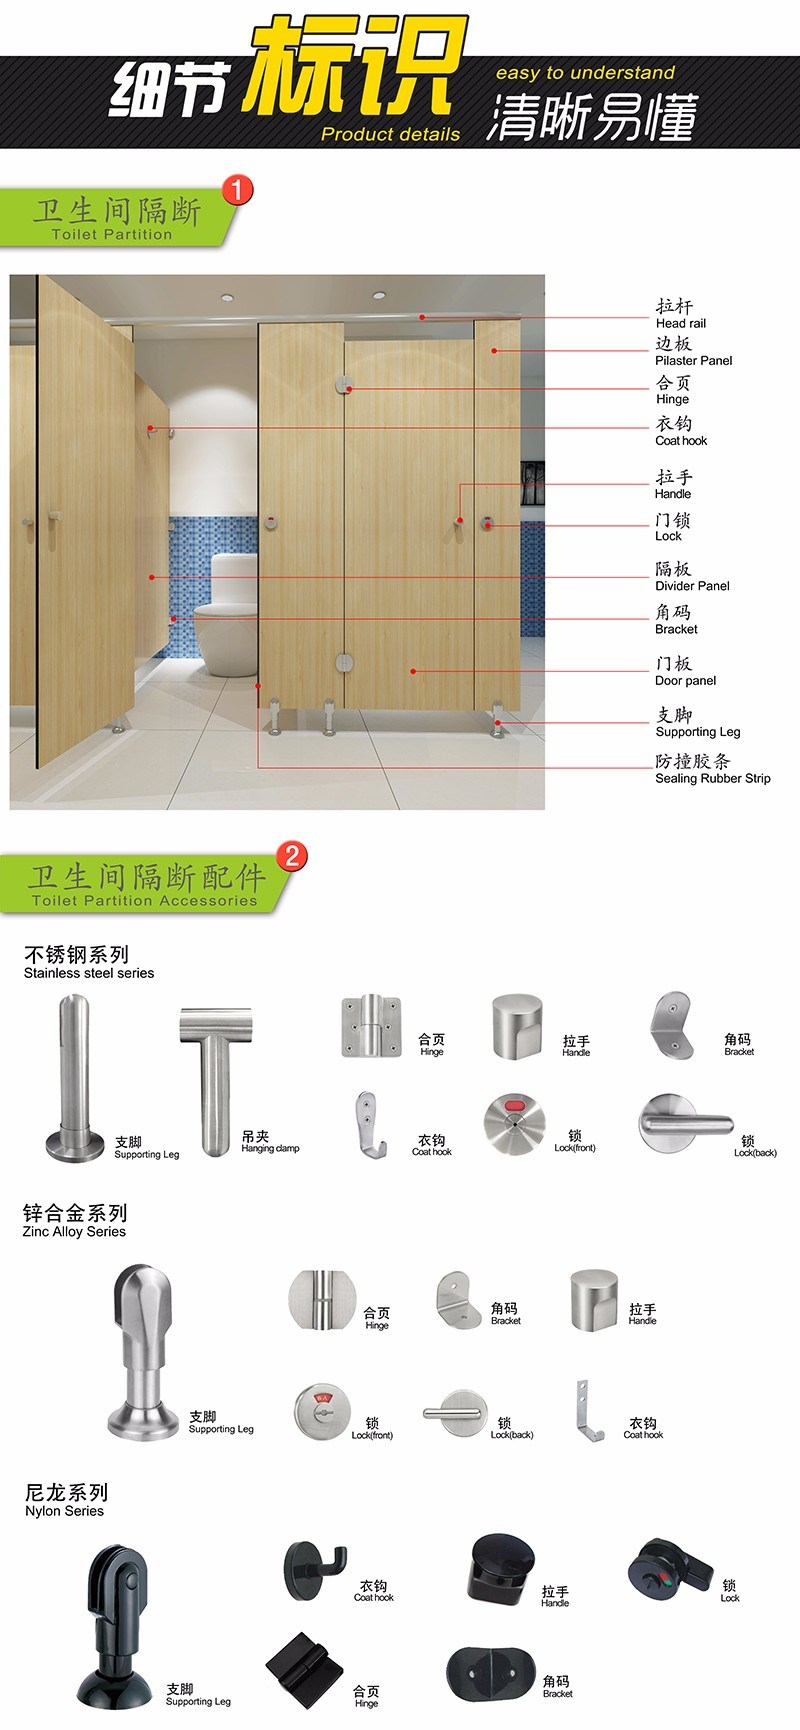 Commercial Public Wc Toilet Cubicle Systems with Indicated Lock